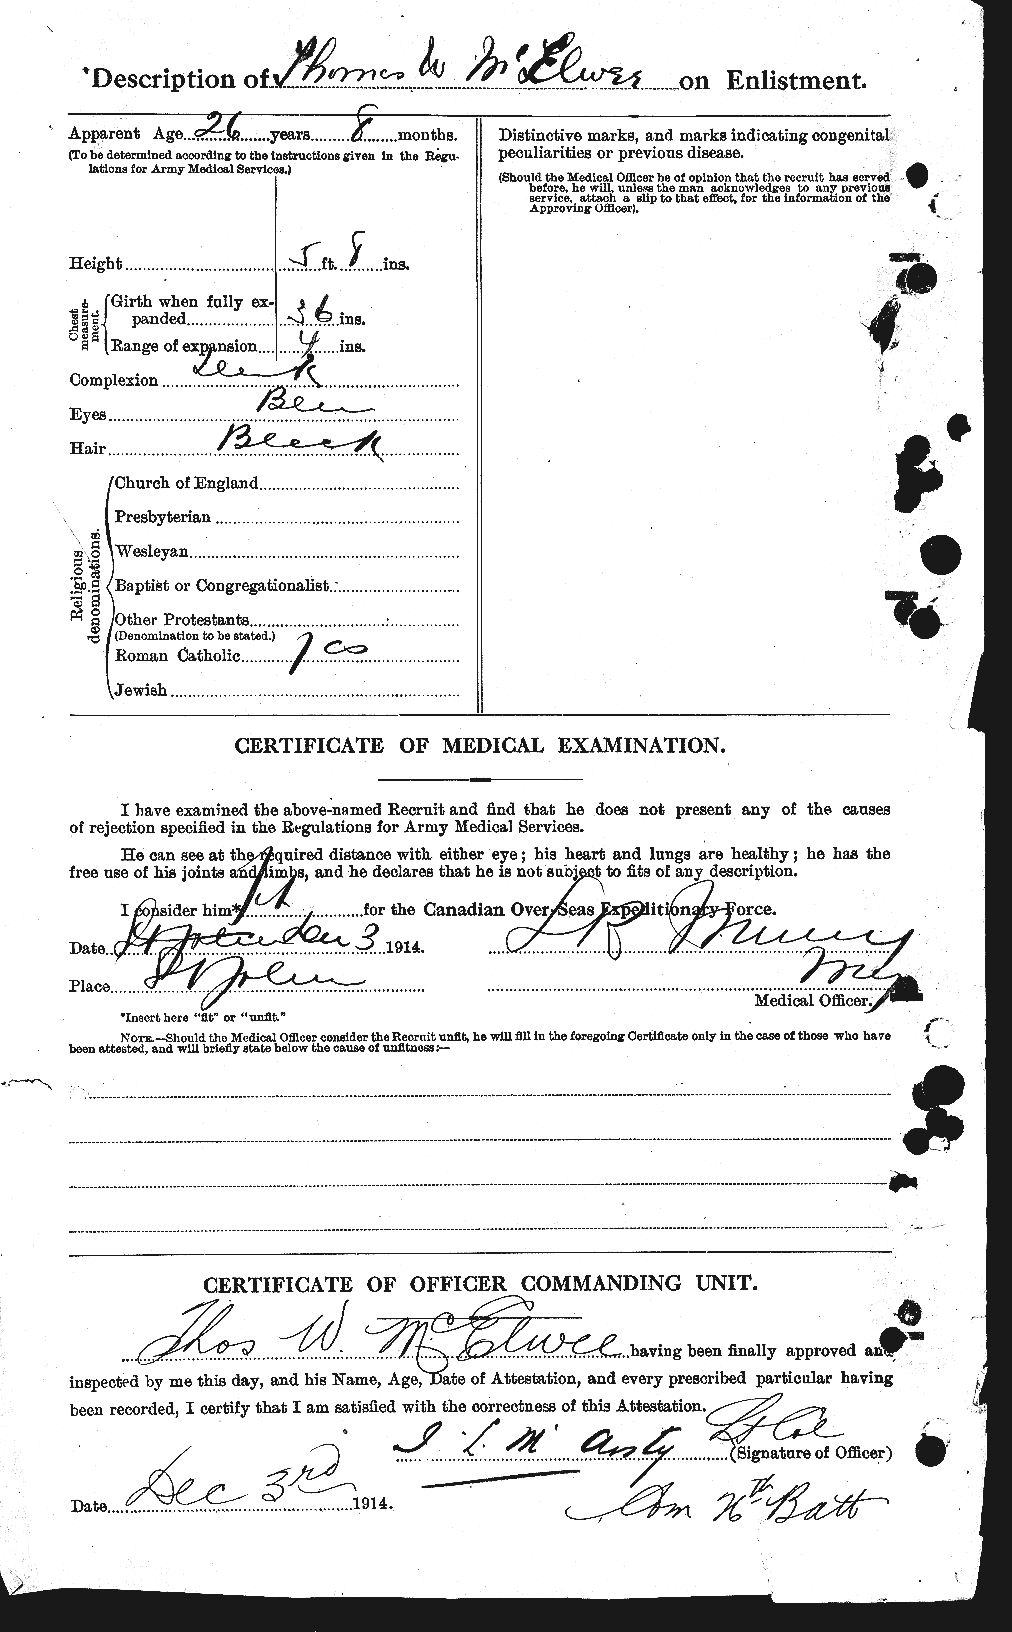 Personnel Records of the First World War - CEF 522124b